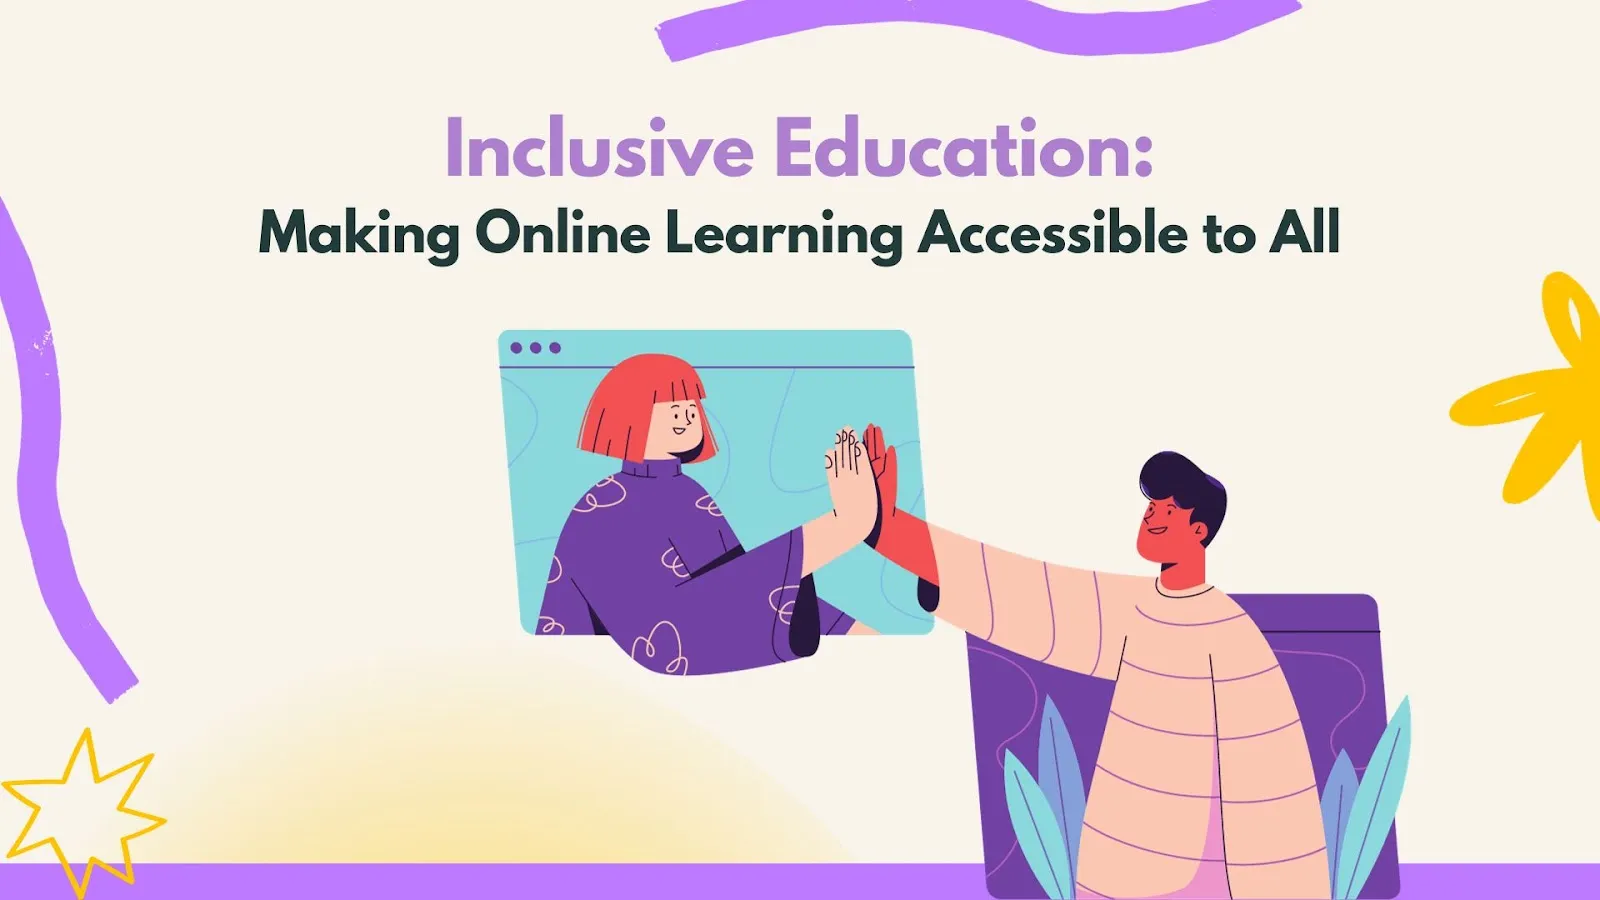 Inclusive Education: Making Online Learning Accessible to All